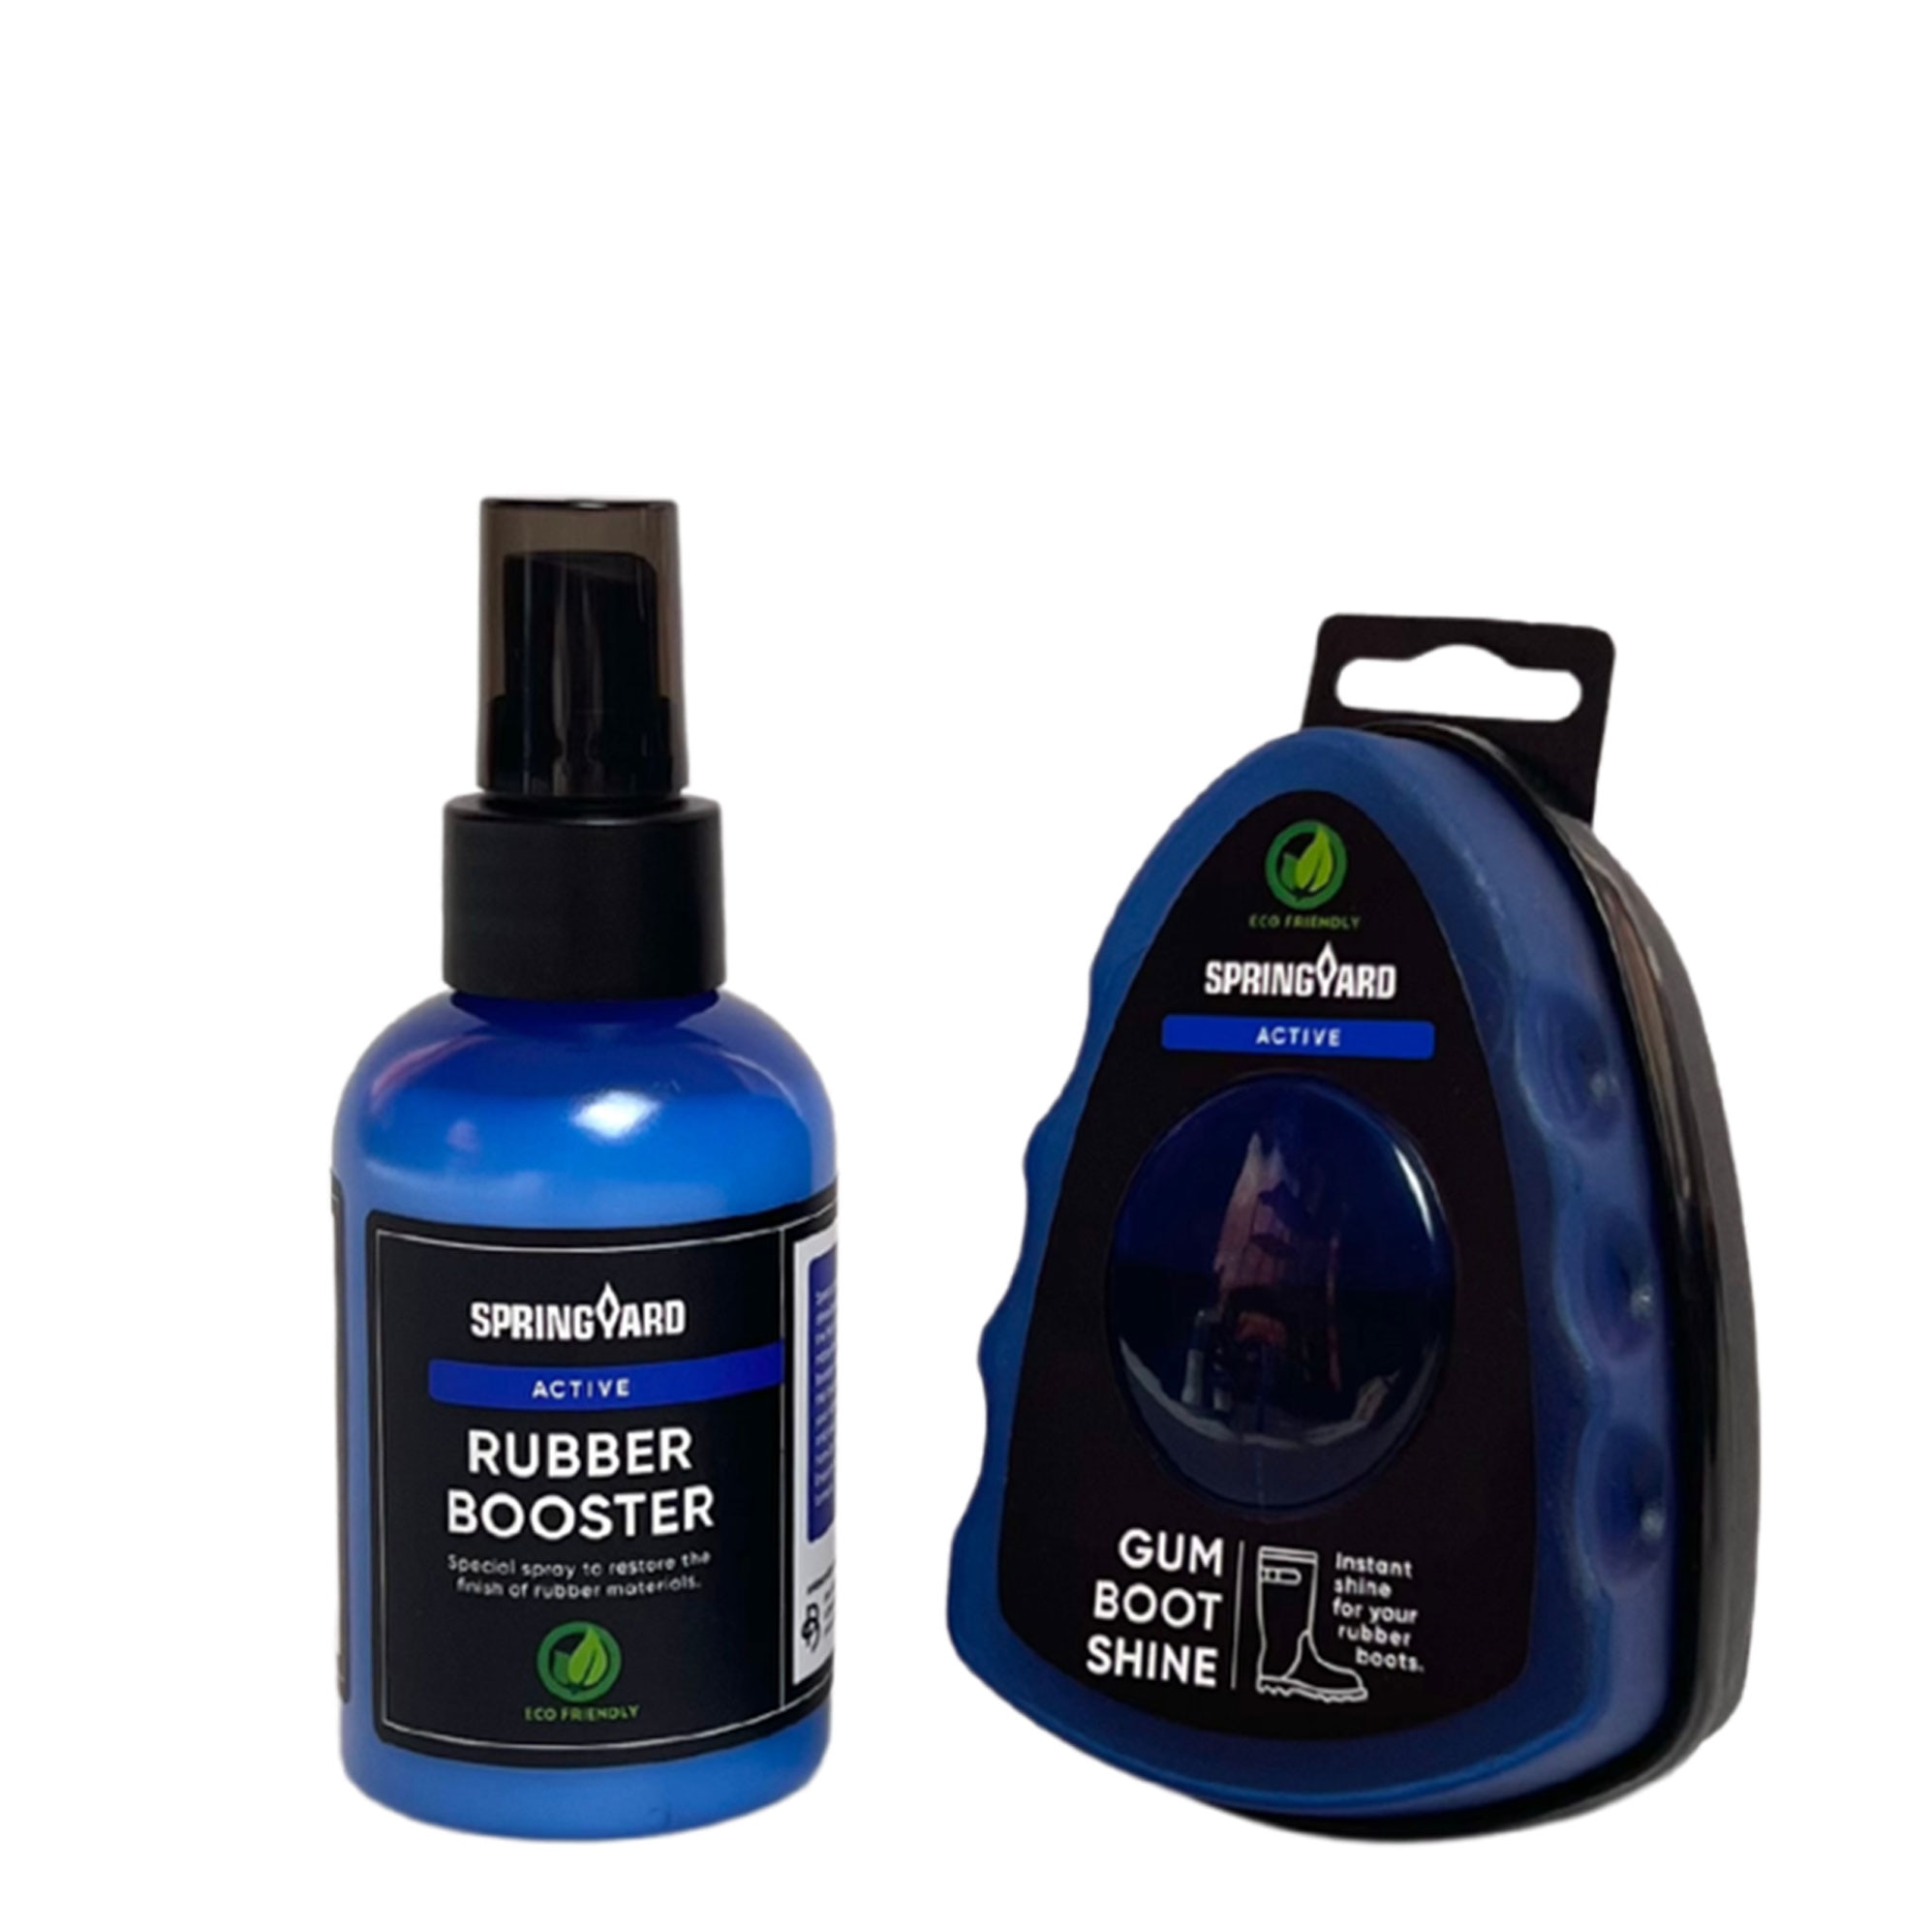 Active Rubber Booster Kit